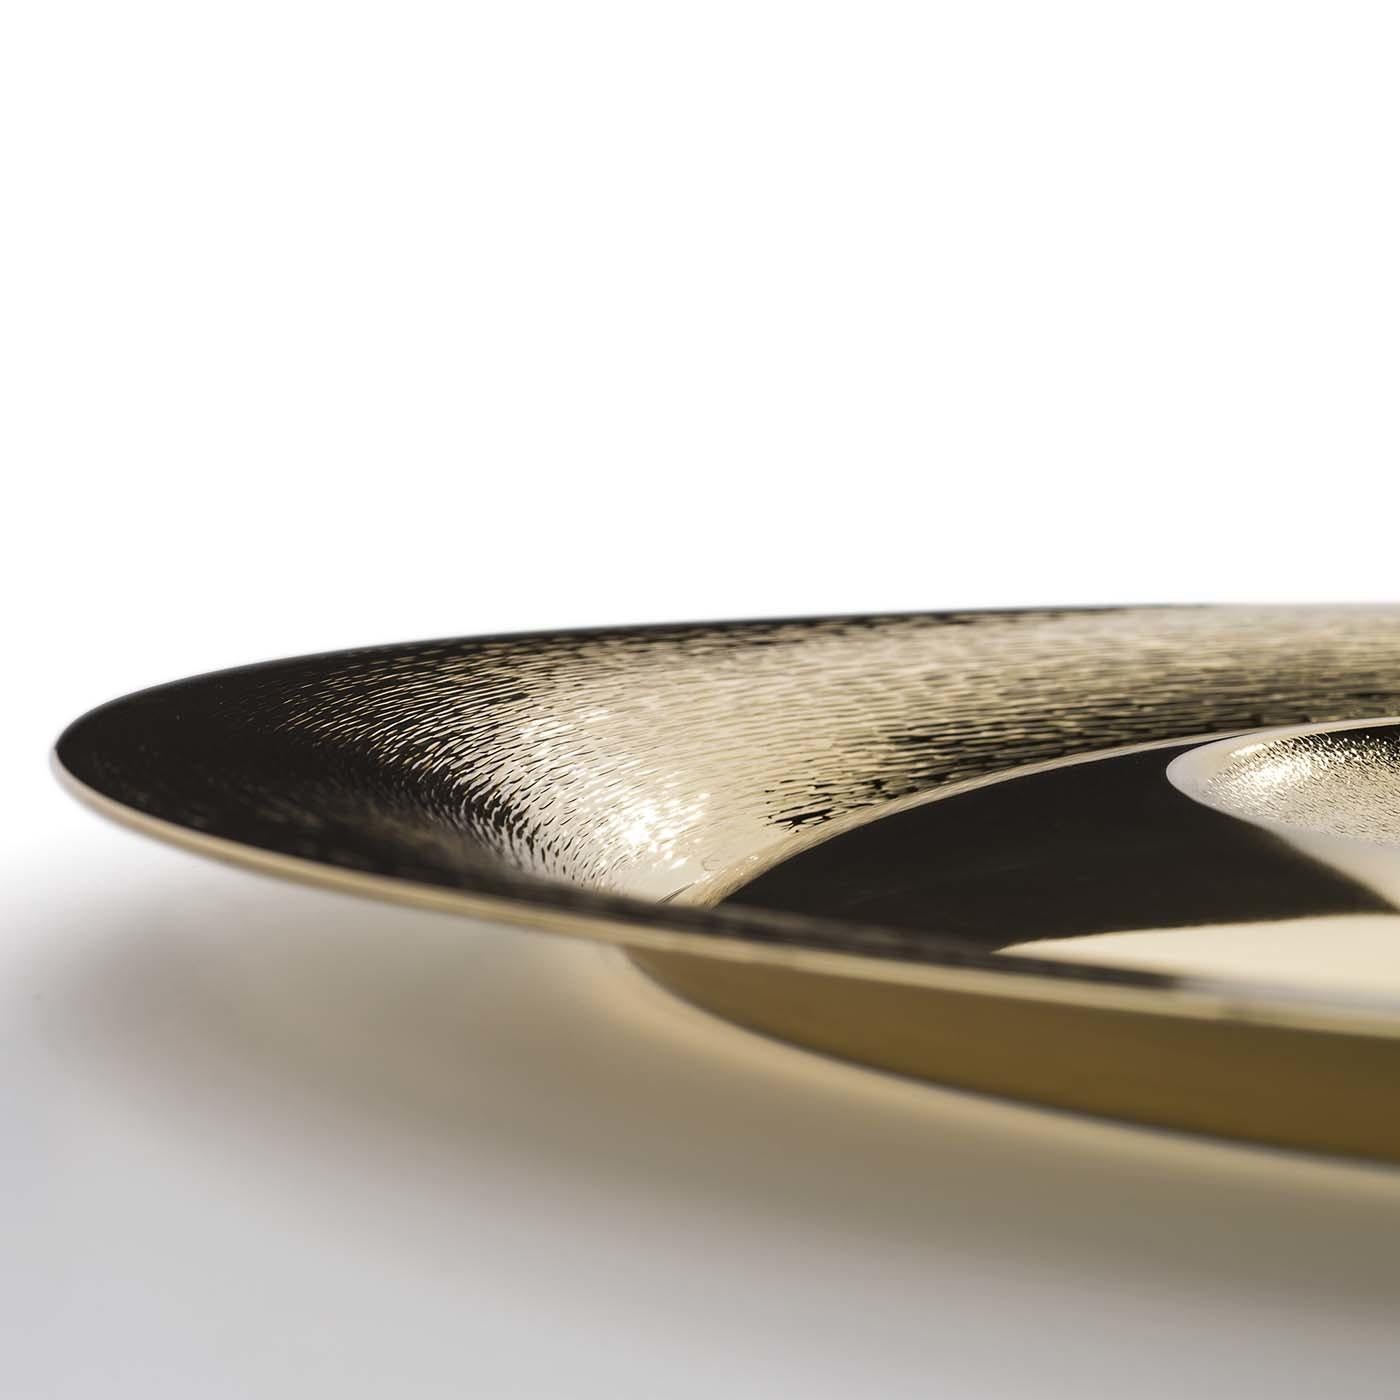 Crafted of brass with a gold-plating, this elegant bowl exemplifies traditional craftsmanship and innovative design aesthetic. The round plate features a flared rim sloping towards the center of the plate to create an undulating surface alternating